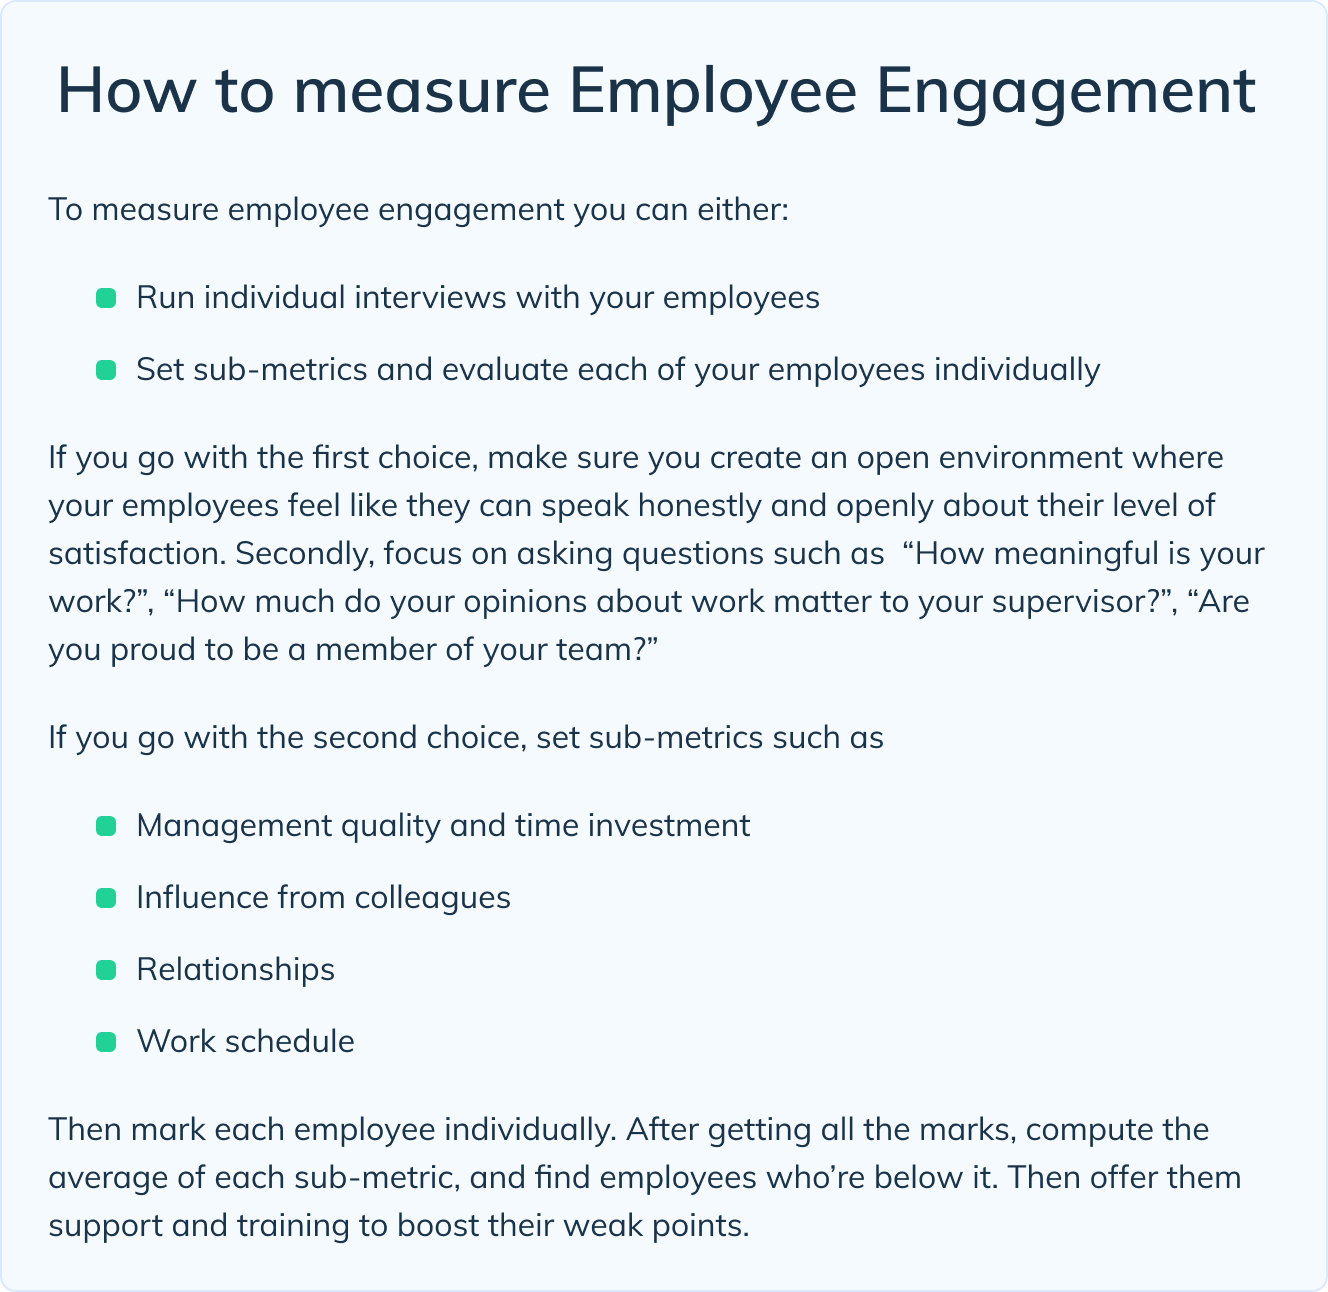 How to measure Employee Engagement